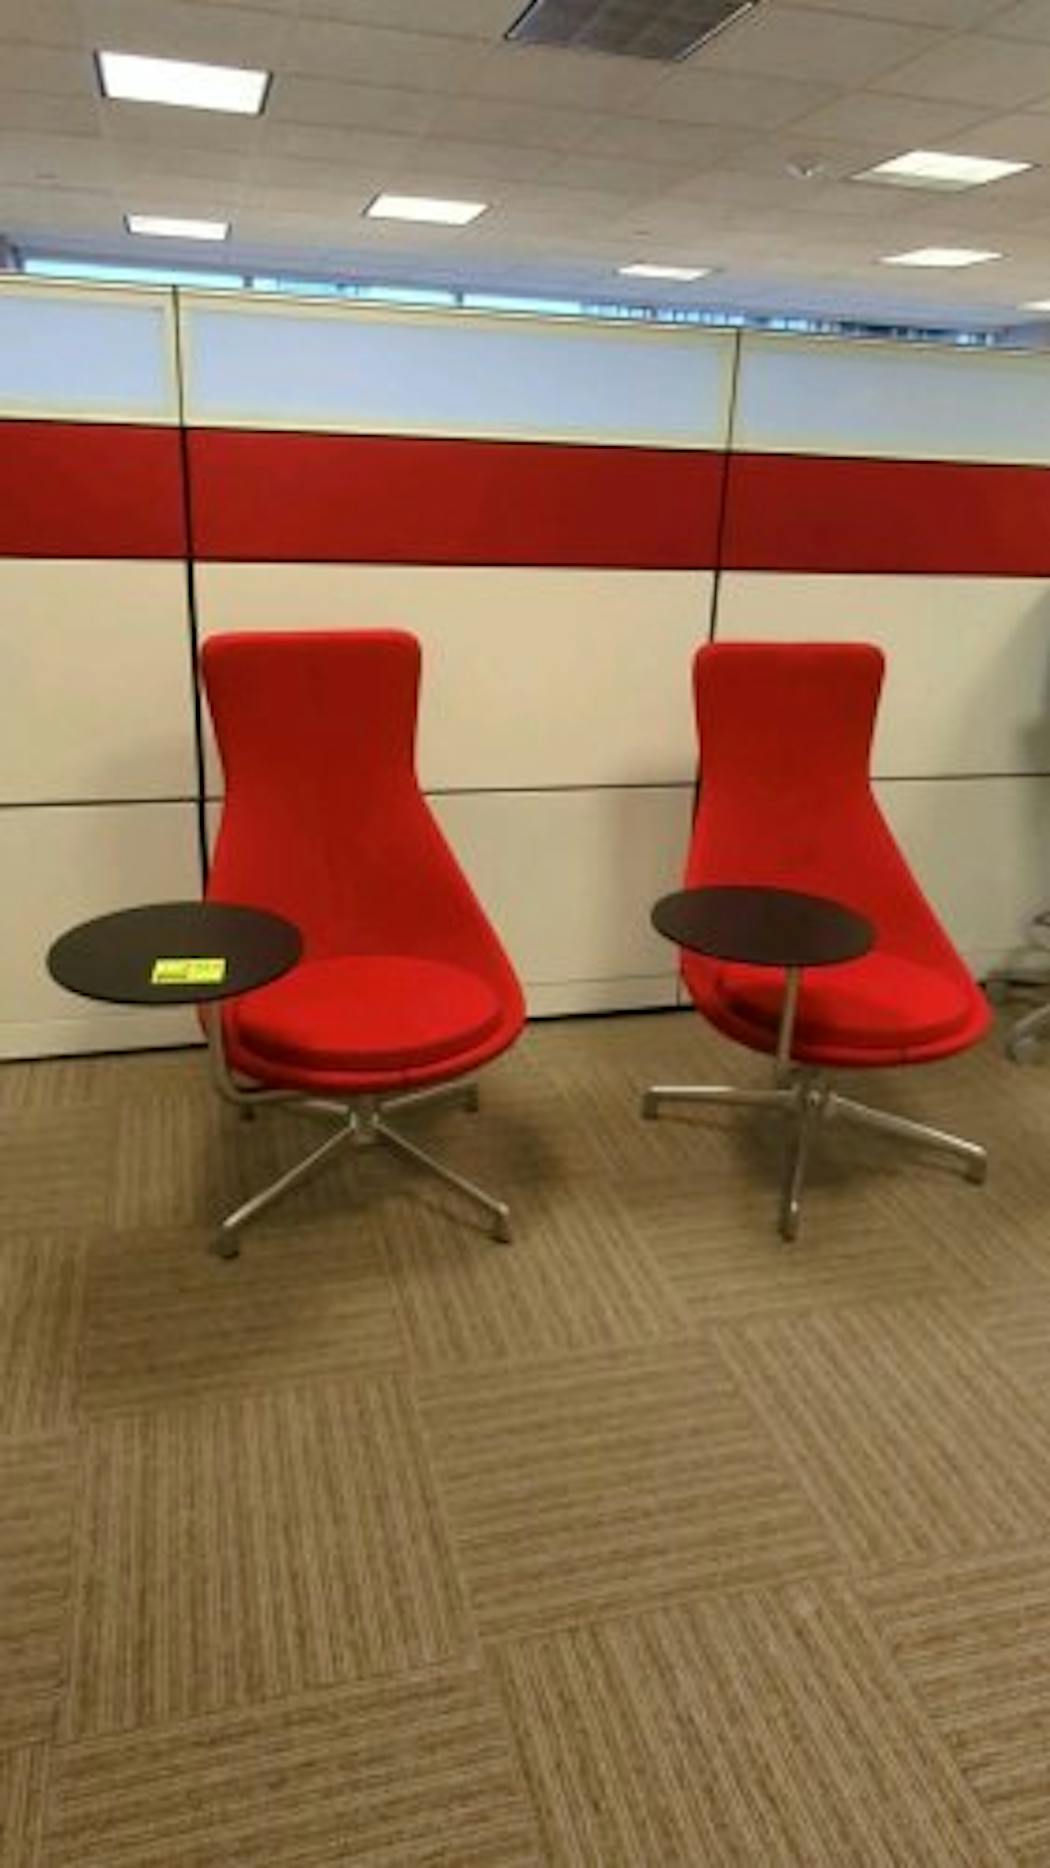 Target is auctioning off its City Center office furnishings.